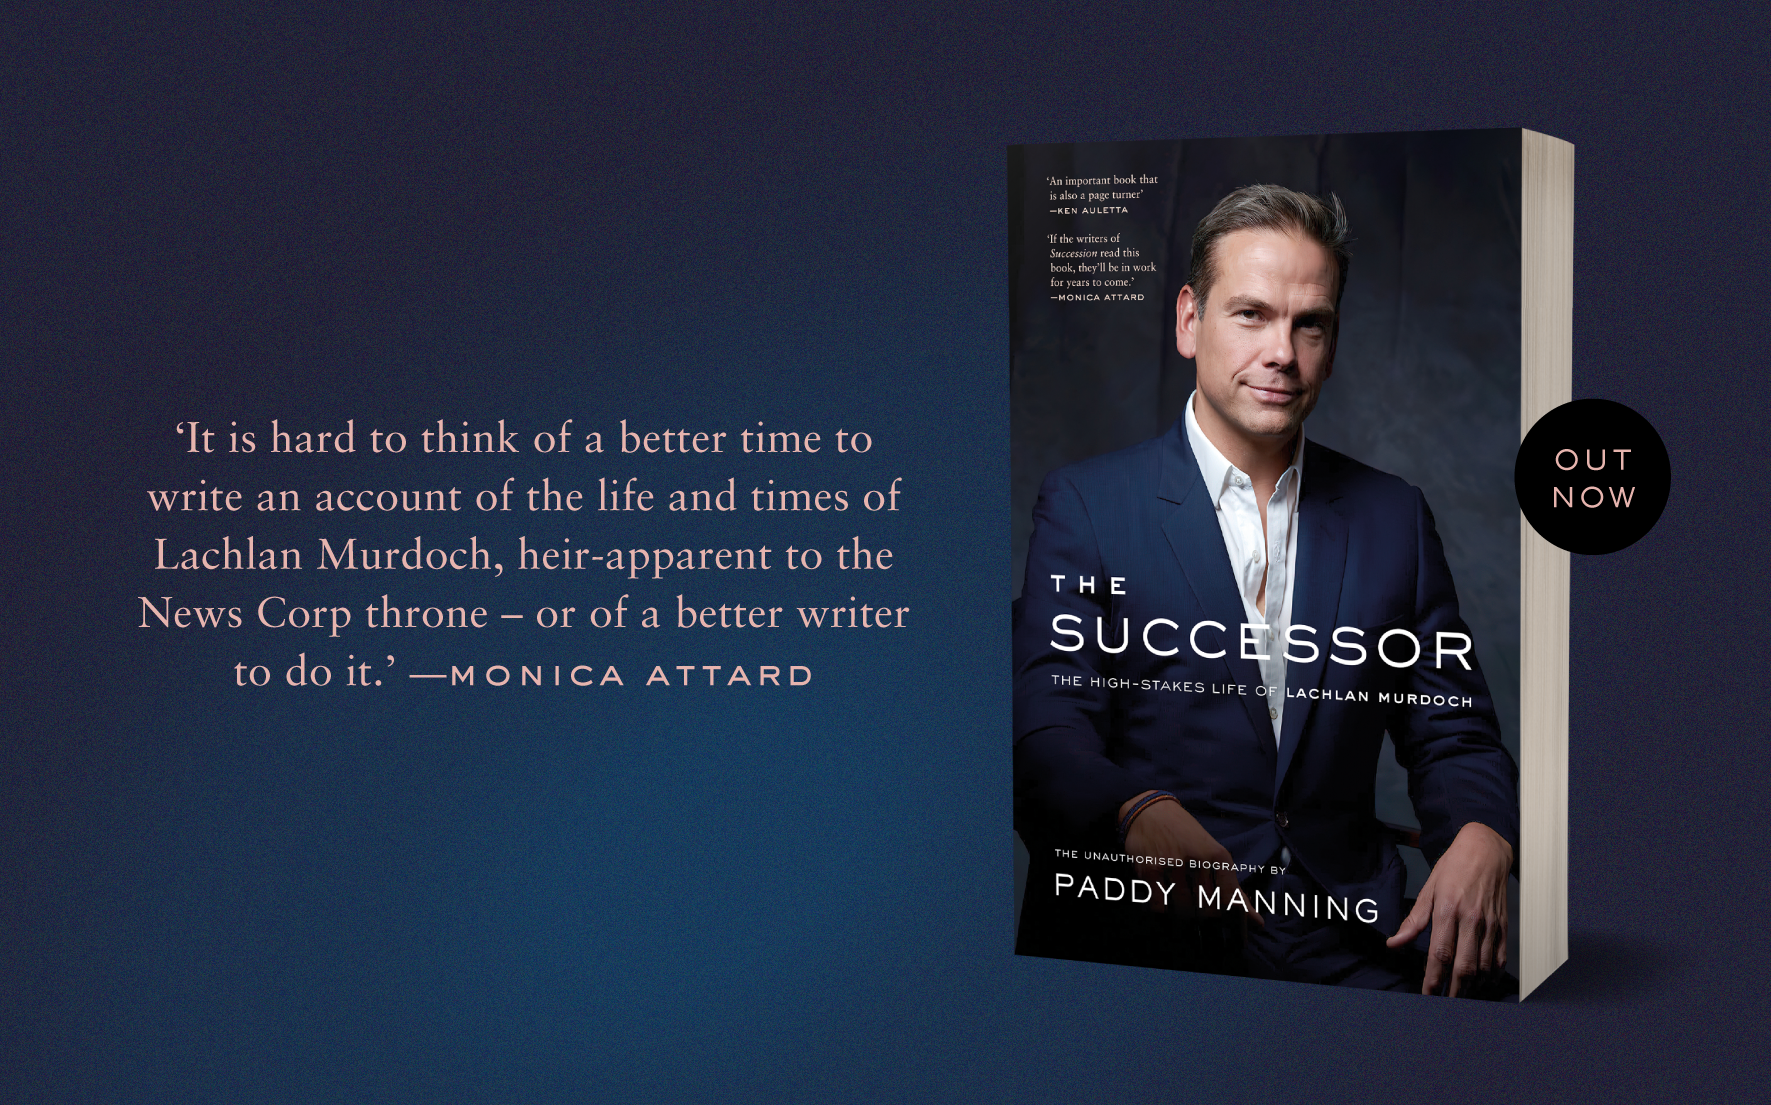 Out now: The Successor